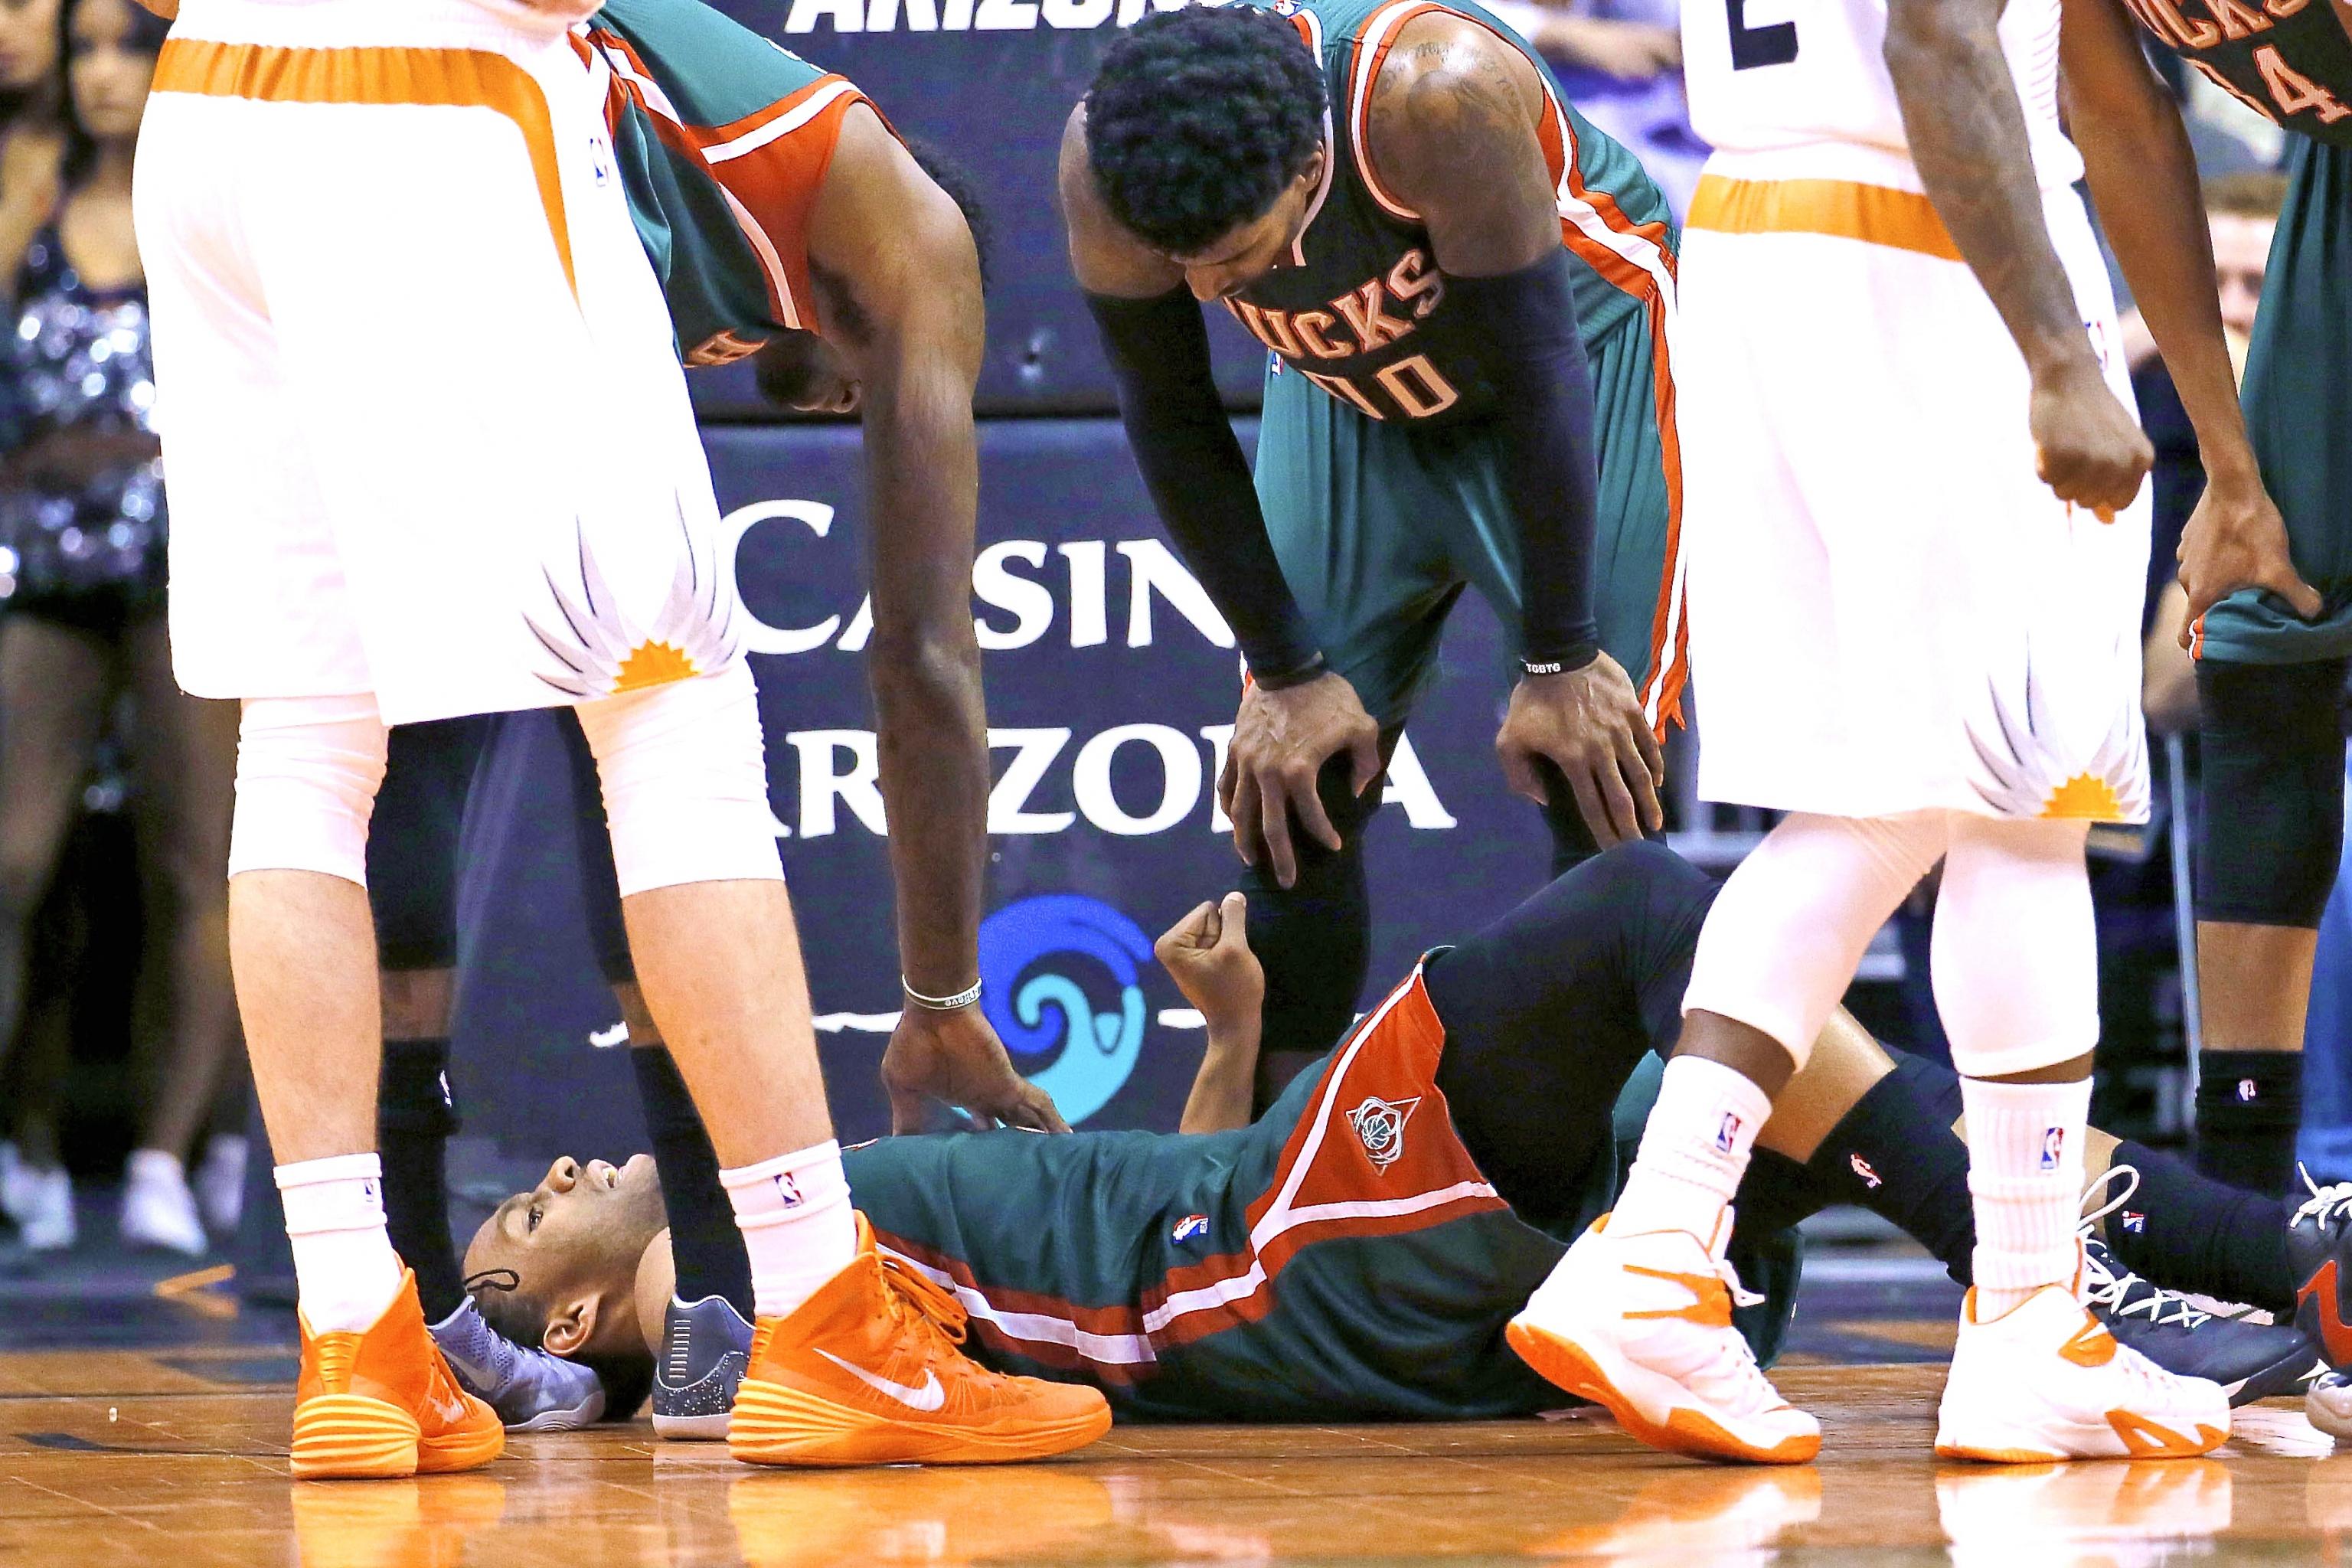 Jabari Parker leaves game with sprained knee (Video)